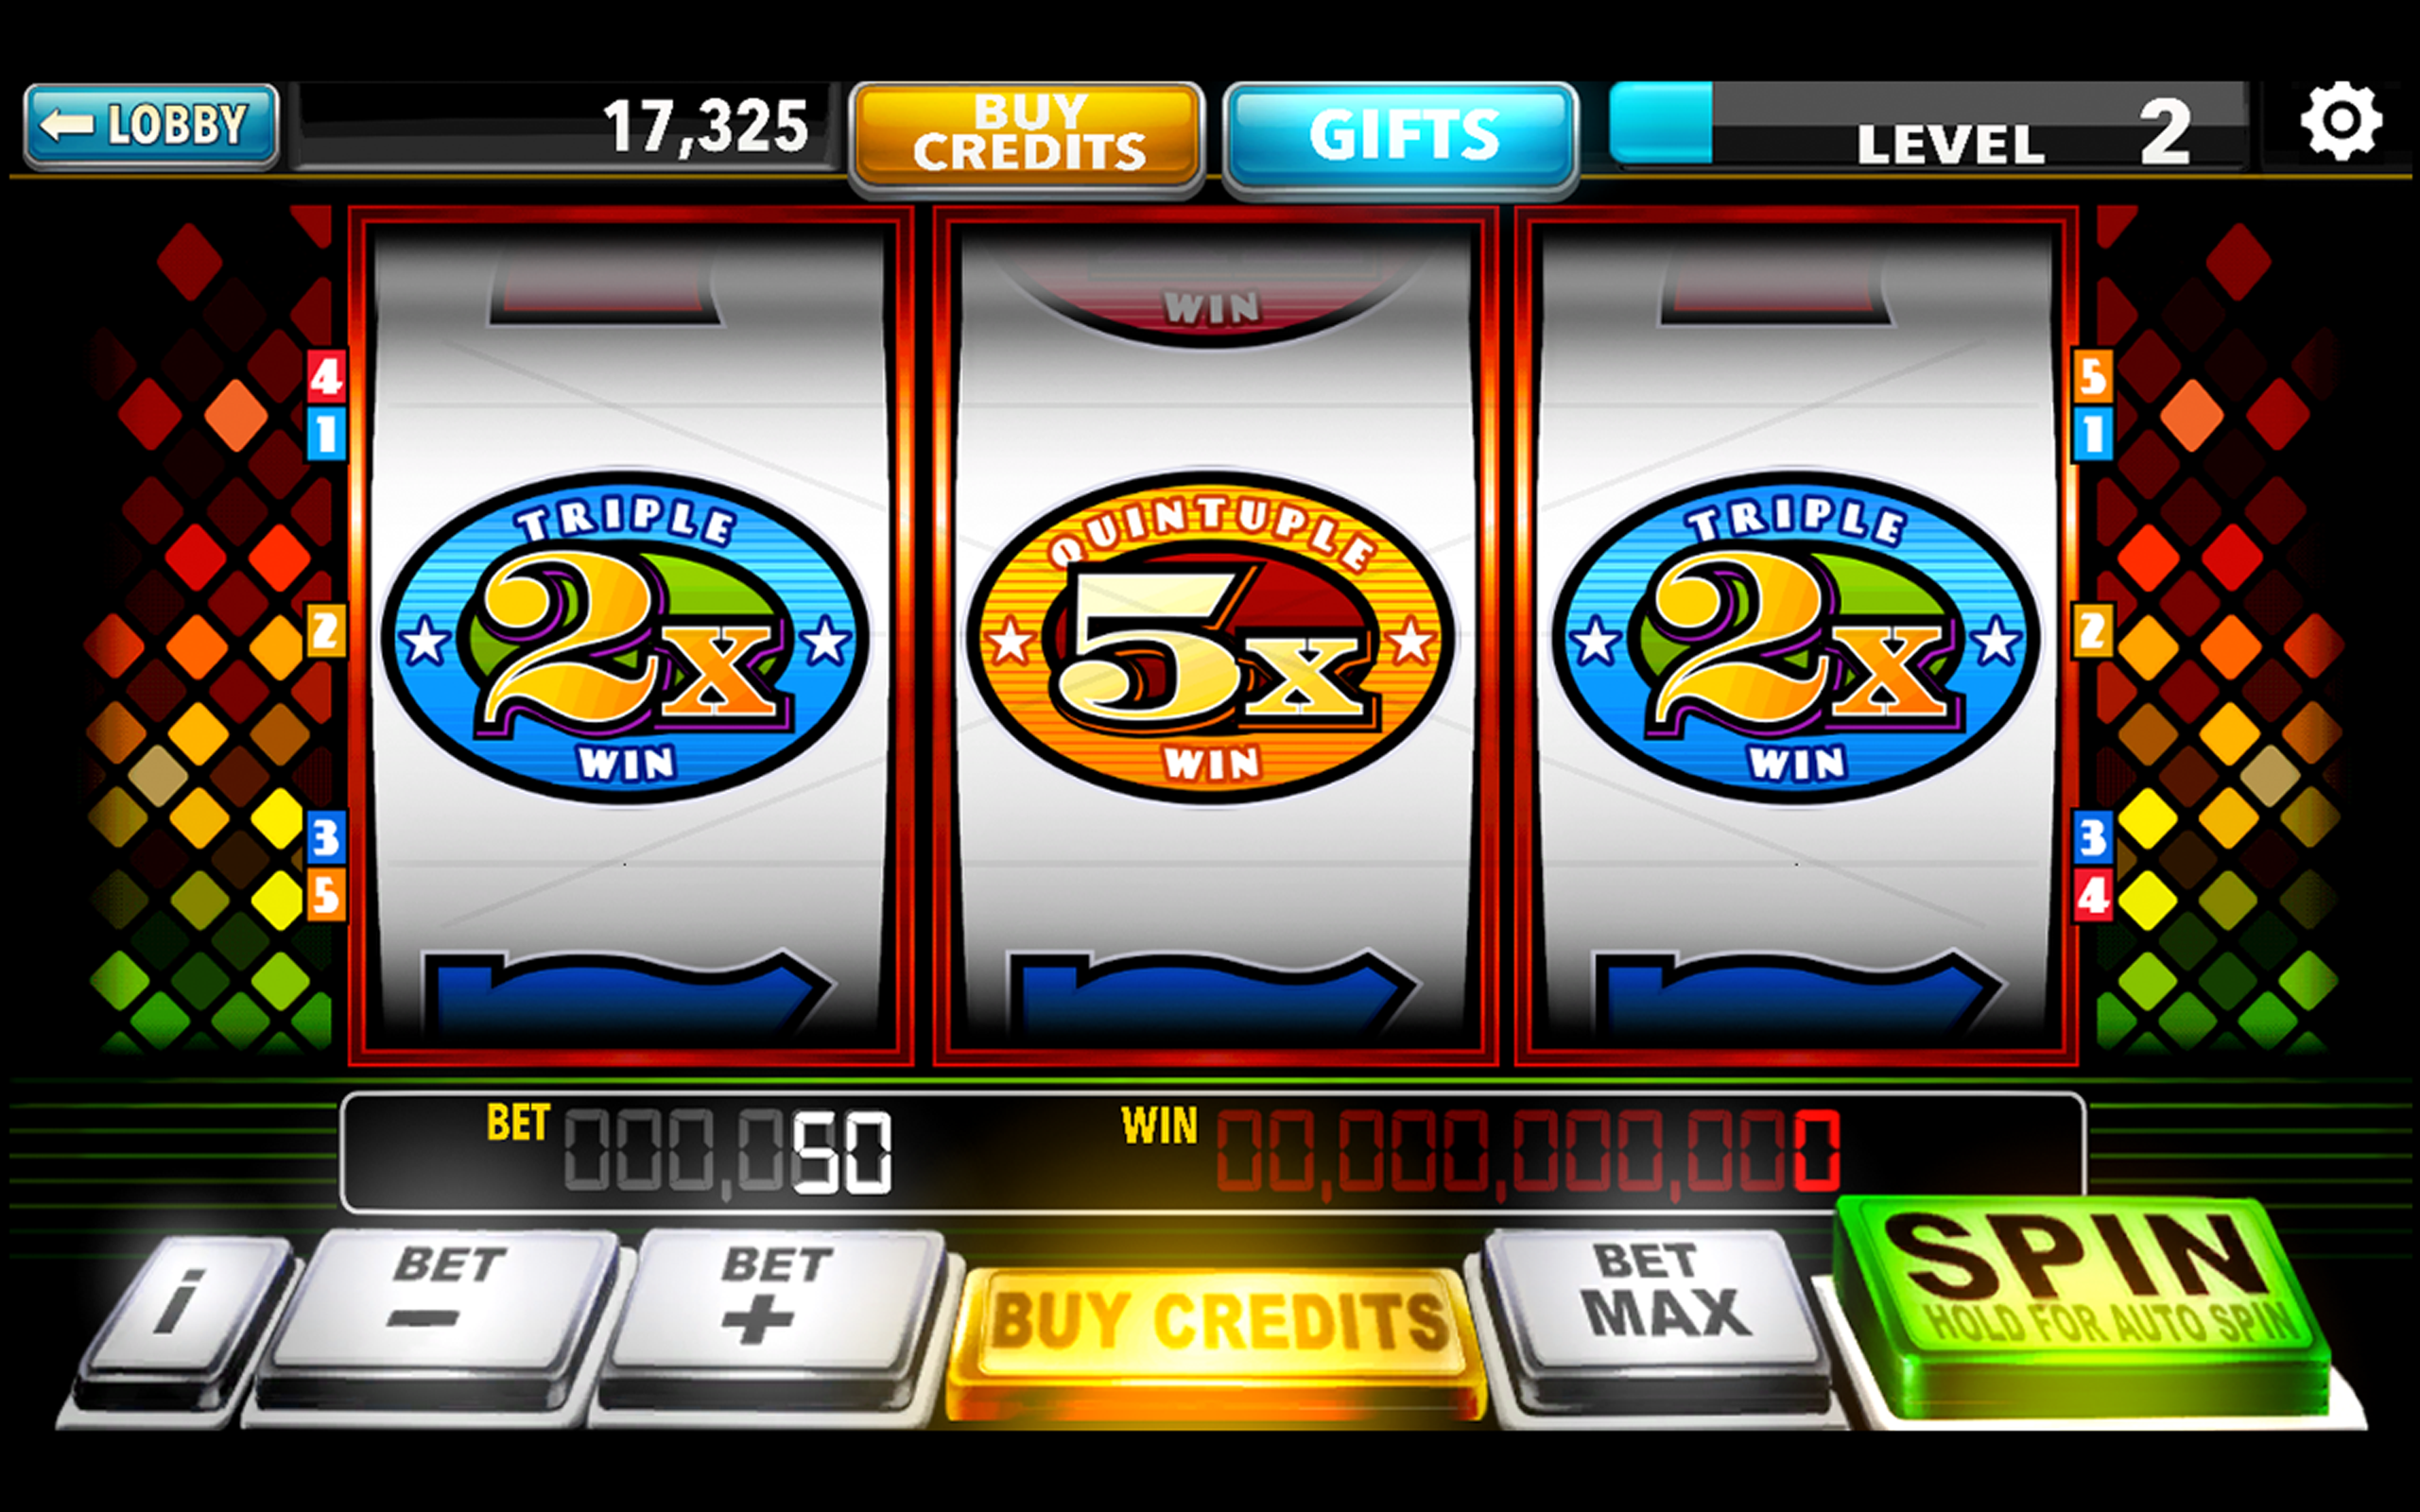 Slot Games With Free Spins